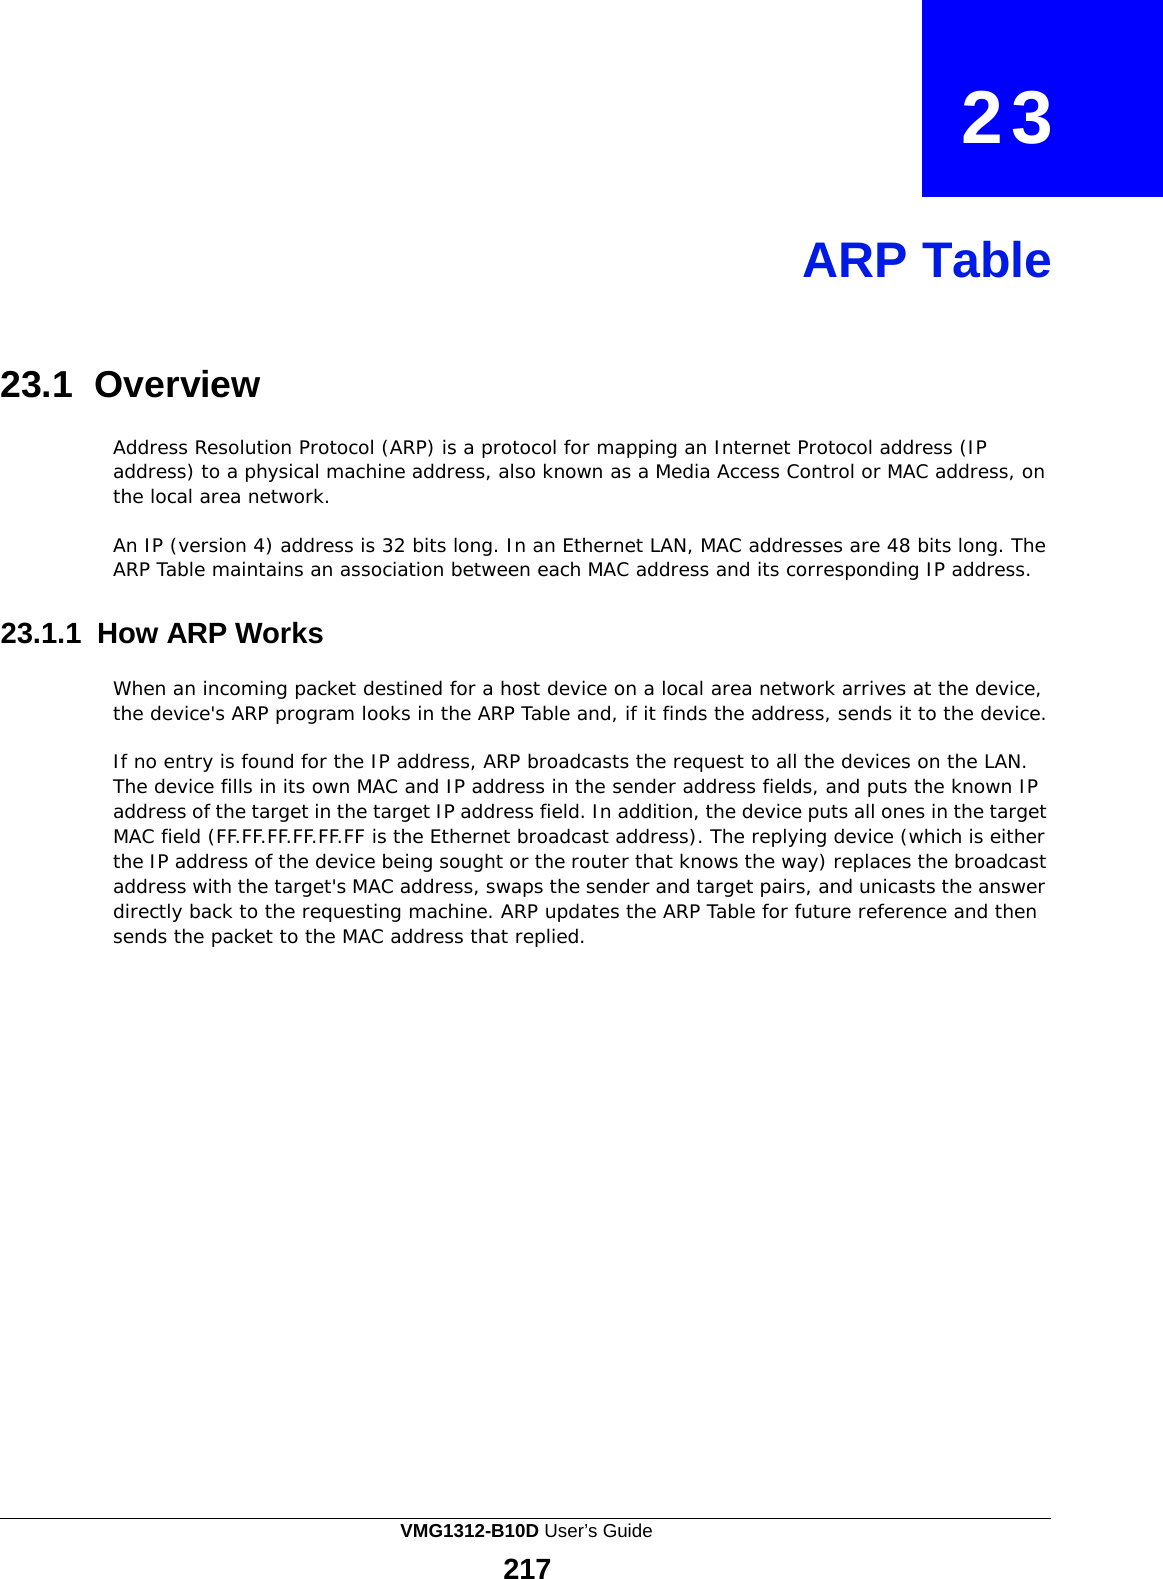  23     ARP Table     23.1 Overview  Address Resolution Protocol (ARP) is a protocol for mapping an Internet Protocol address (IP address) to a physical machine address, also known as a Media Access Control or MAC address, on the local area network.  An IP (version 4) address is 32 bits long. In an Ethernet LAN, MAC addresses are 48 bits long. The ARP Table maintains an association between each MAC address and its corresponding IP address.   23.1.1 How ARP Works  When an incoming packet destined for a host device on a local area network arrives at the device, the device&apos;s ARP program looks in the ARP Table and, if it finds the address, sends it to the device.  If no entry is found for the IP address, ARP broadcasts the request to all the devices on the LAN. The device fills in its own MAC and IP address in the sender address fields, and puts the known IP address of the target in the target IP address field. In addition, the device puts all ones in the target MAC field (FF.FF.FF.FF.FF.FF is the Ethernet broadcast address). The replying device (which is either the IP address of the device being sought or the router that knows the way) replaces the broadcast address with the target&apos;s MAC address, swaps the sender and target pairs, and unicasts the answer directly back to the requesting machine. ARP updates the ARP Table for future reference and then sends the packet to the MAC address that replied. VMG1312-B10D User’s Guide 217  